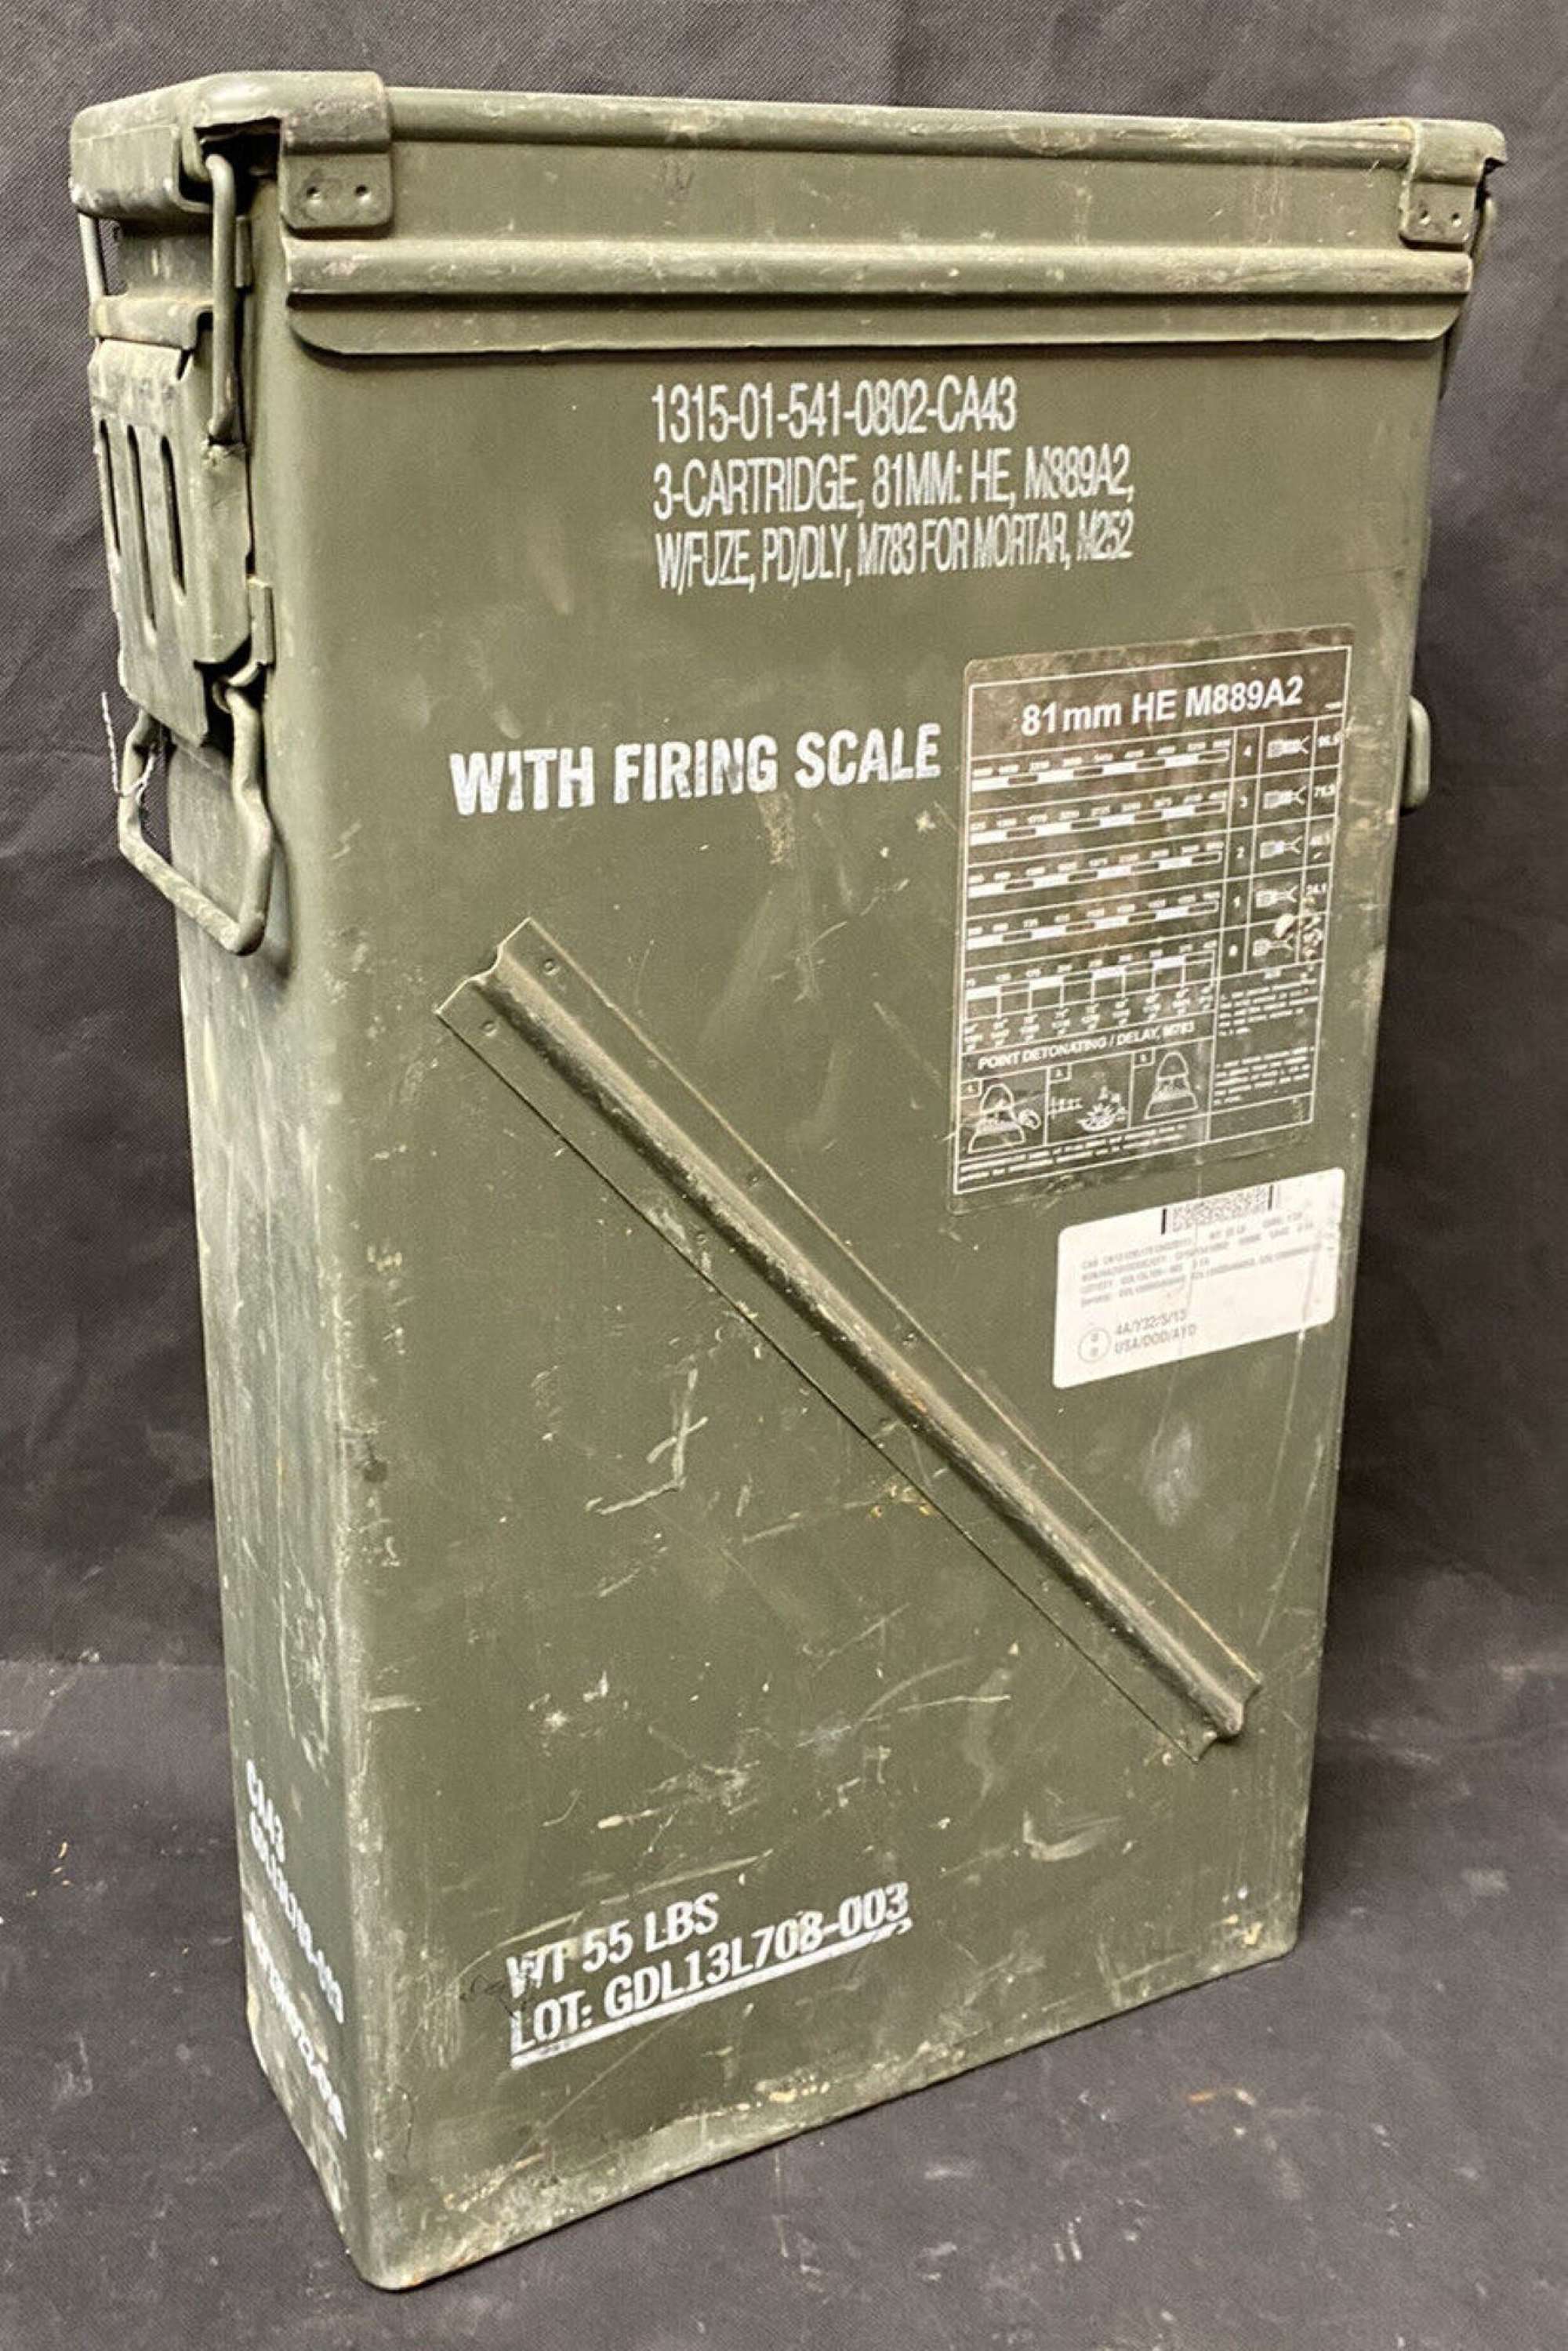 81mm HE Mortar NATO Military Issue Tall Empty Metal Ammo Ammunition Storage Box